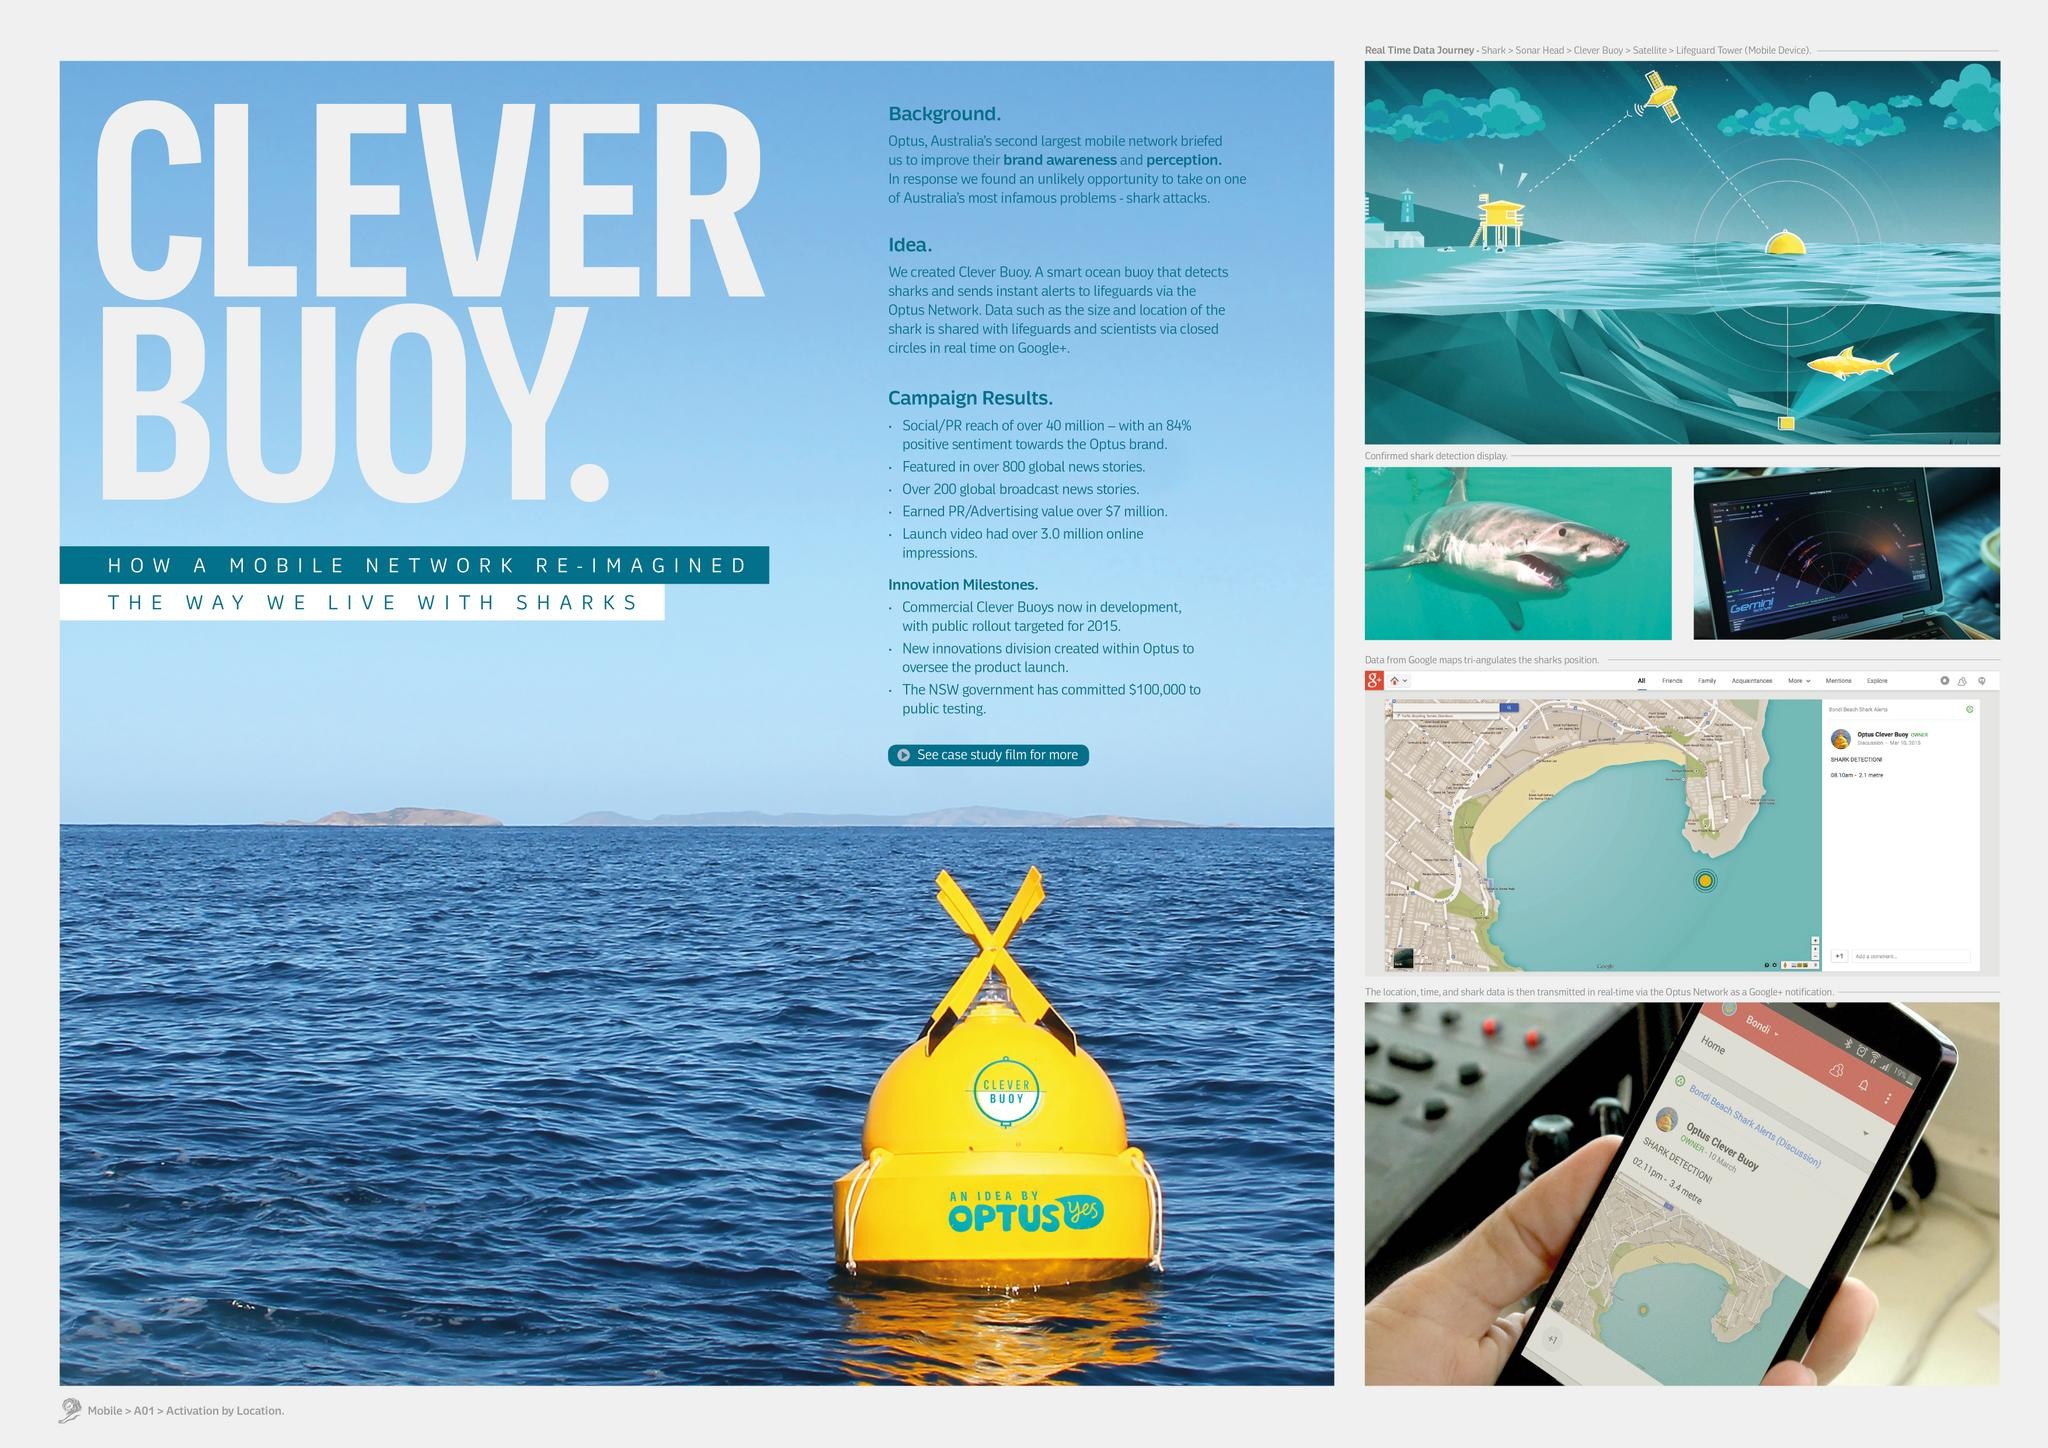 CLEVER BUOY